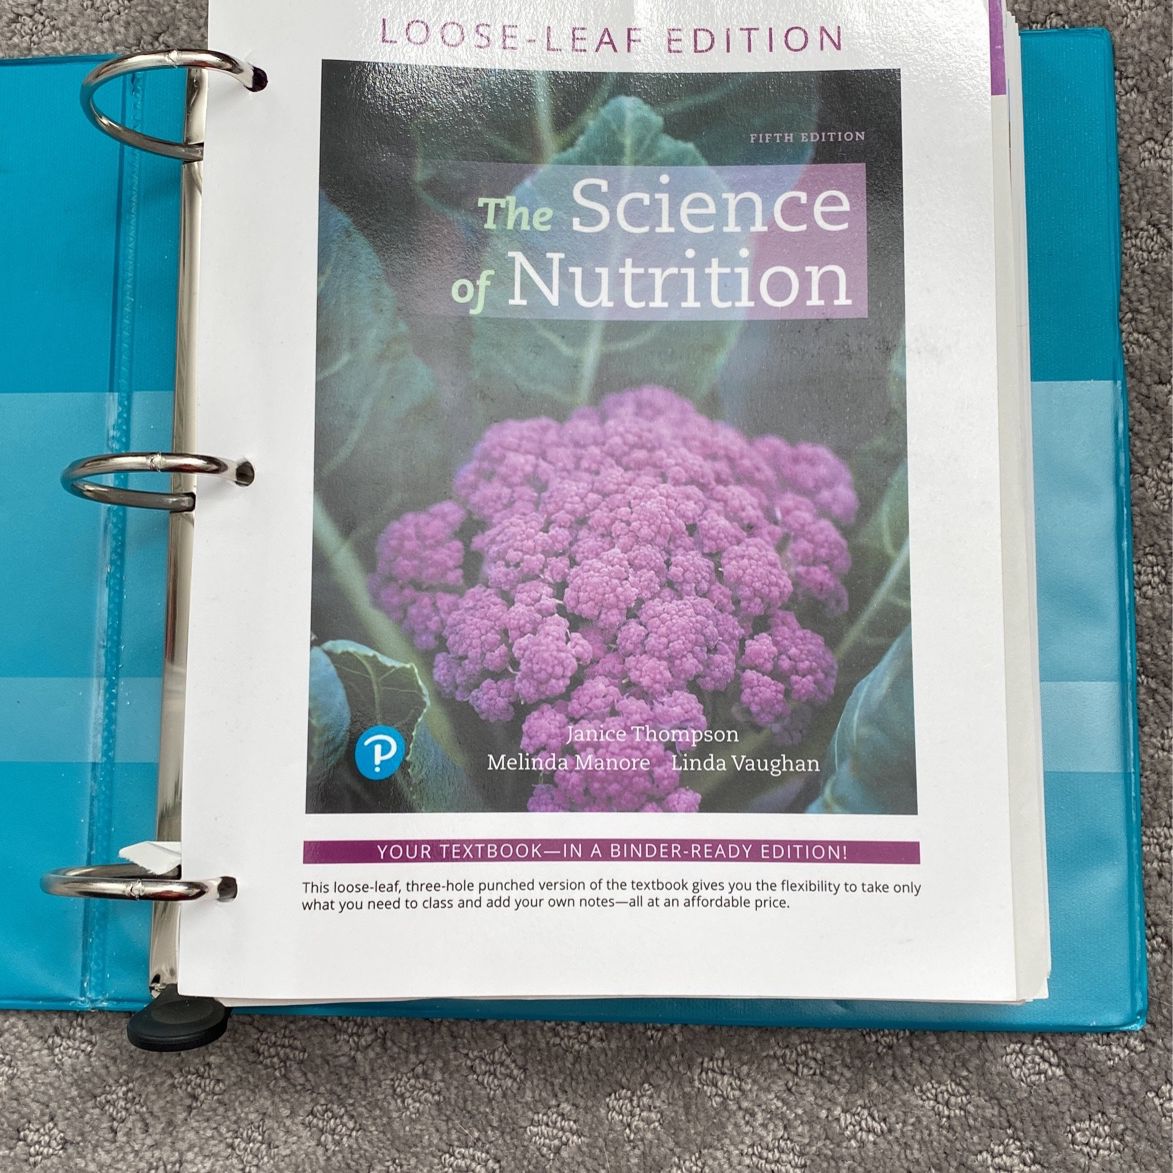 The Science Of Nutrition (Fifth Edition)